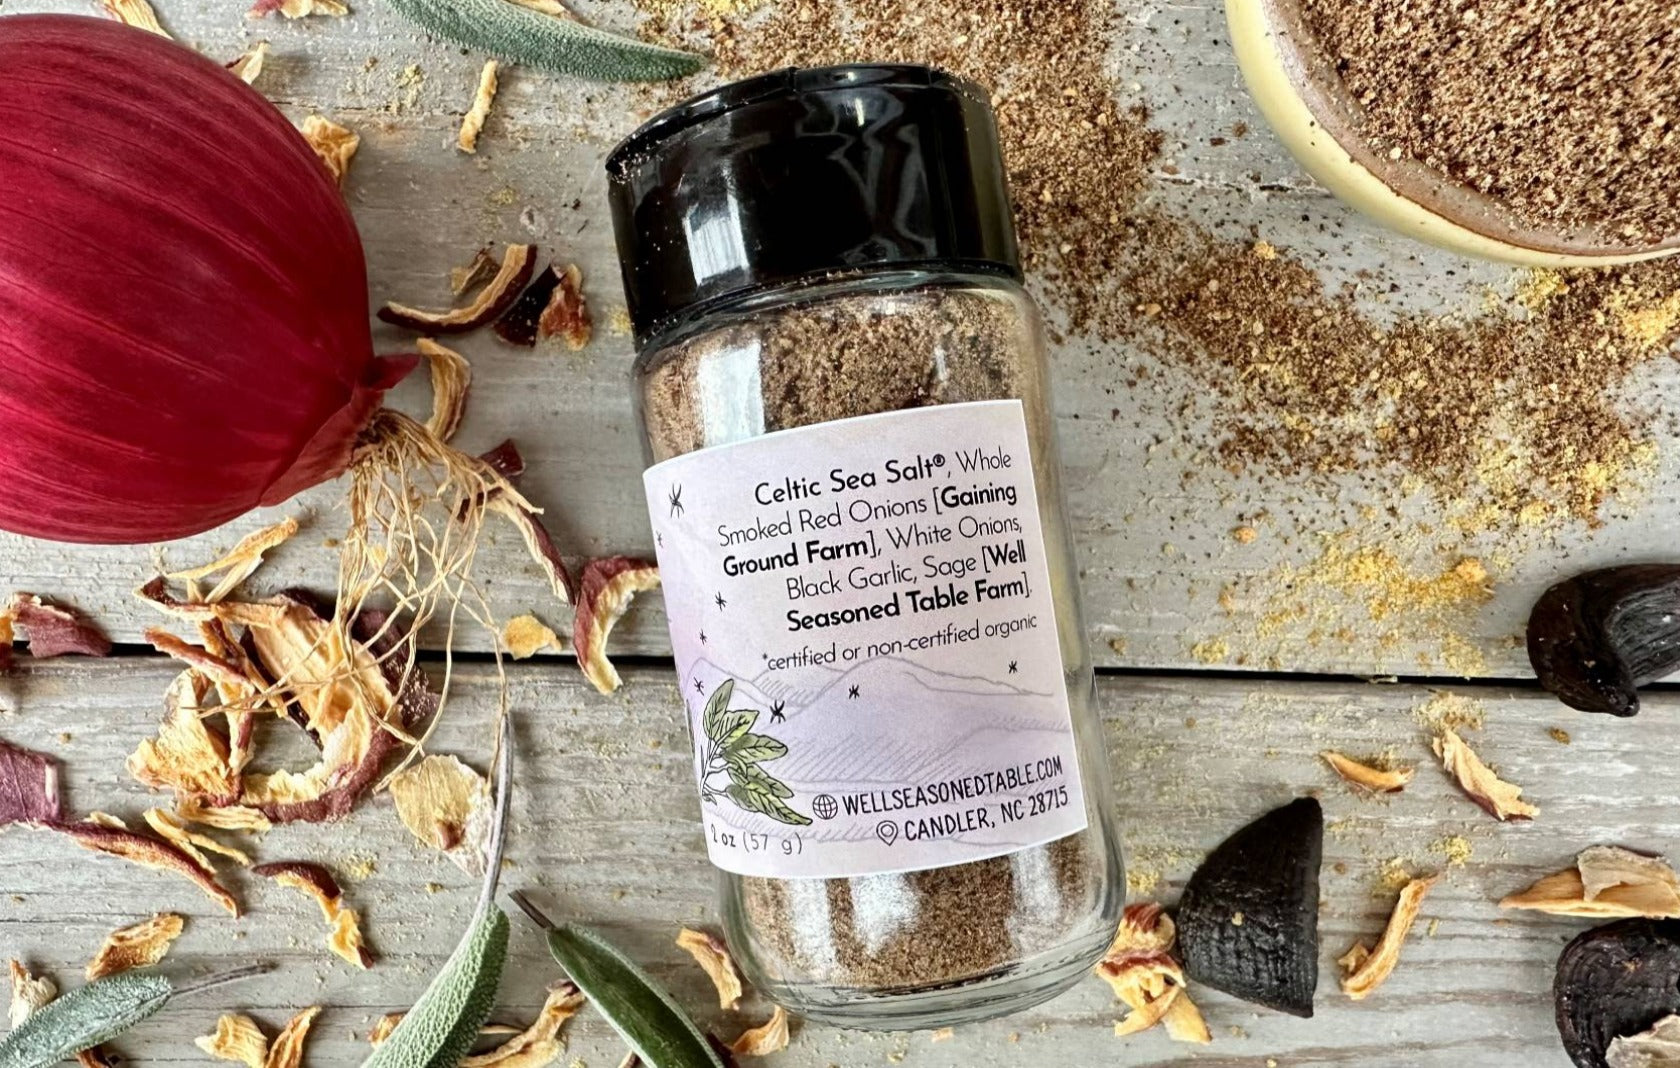 The side of a glass seasoning jar of Magic Onion Dust from Well Seasoned Table on a wooden background with onions, sage, and black garlic around it.